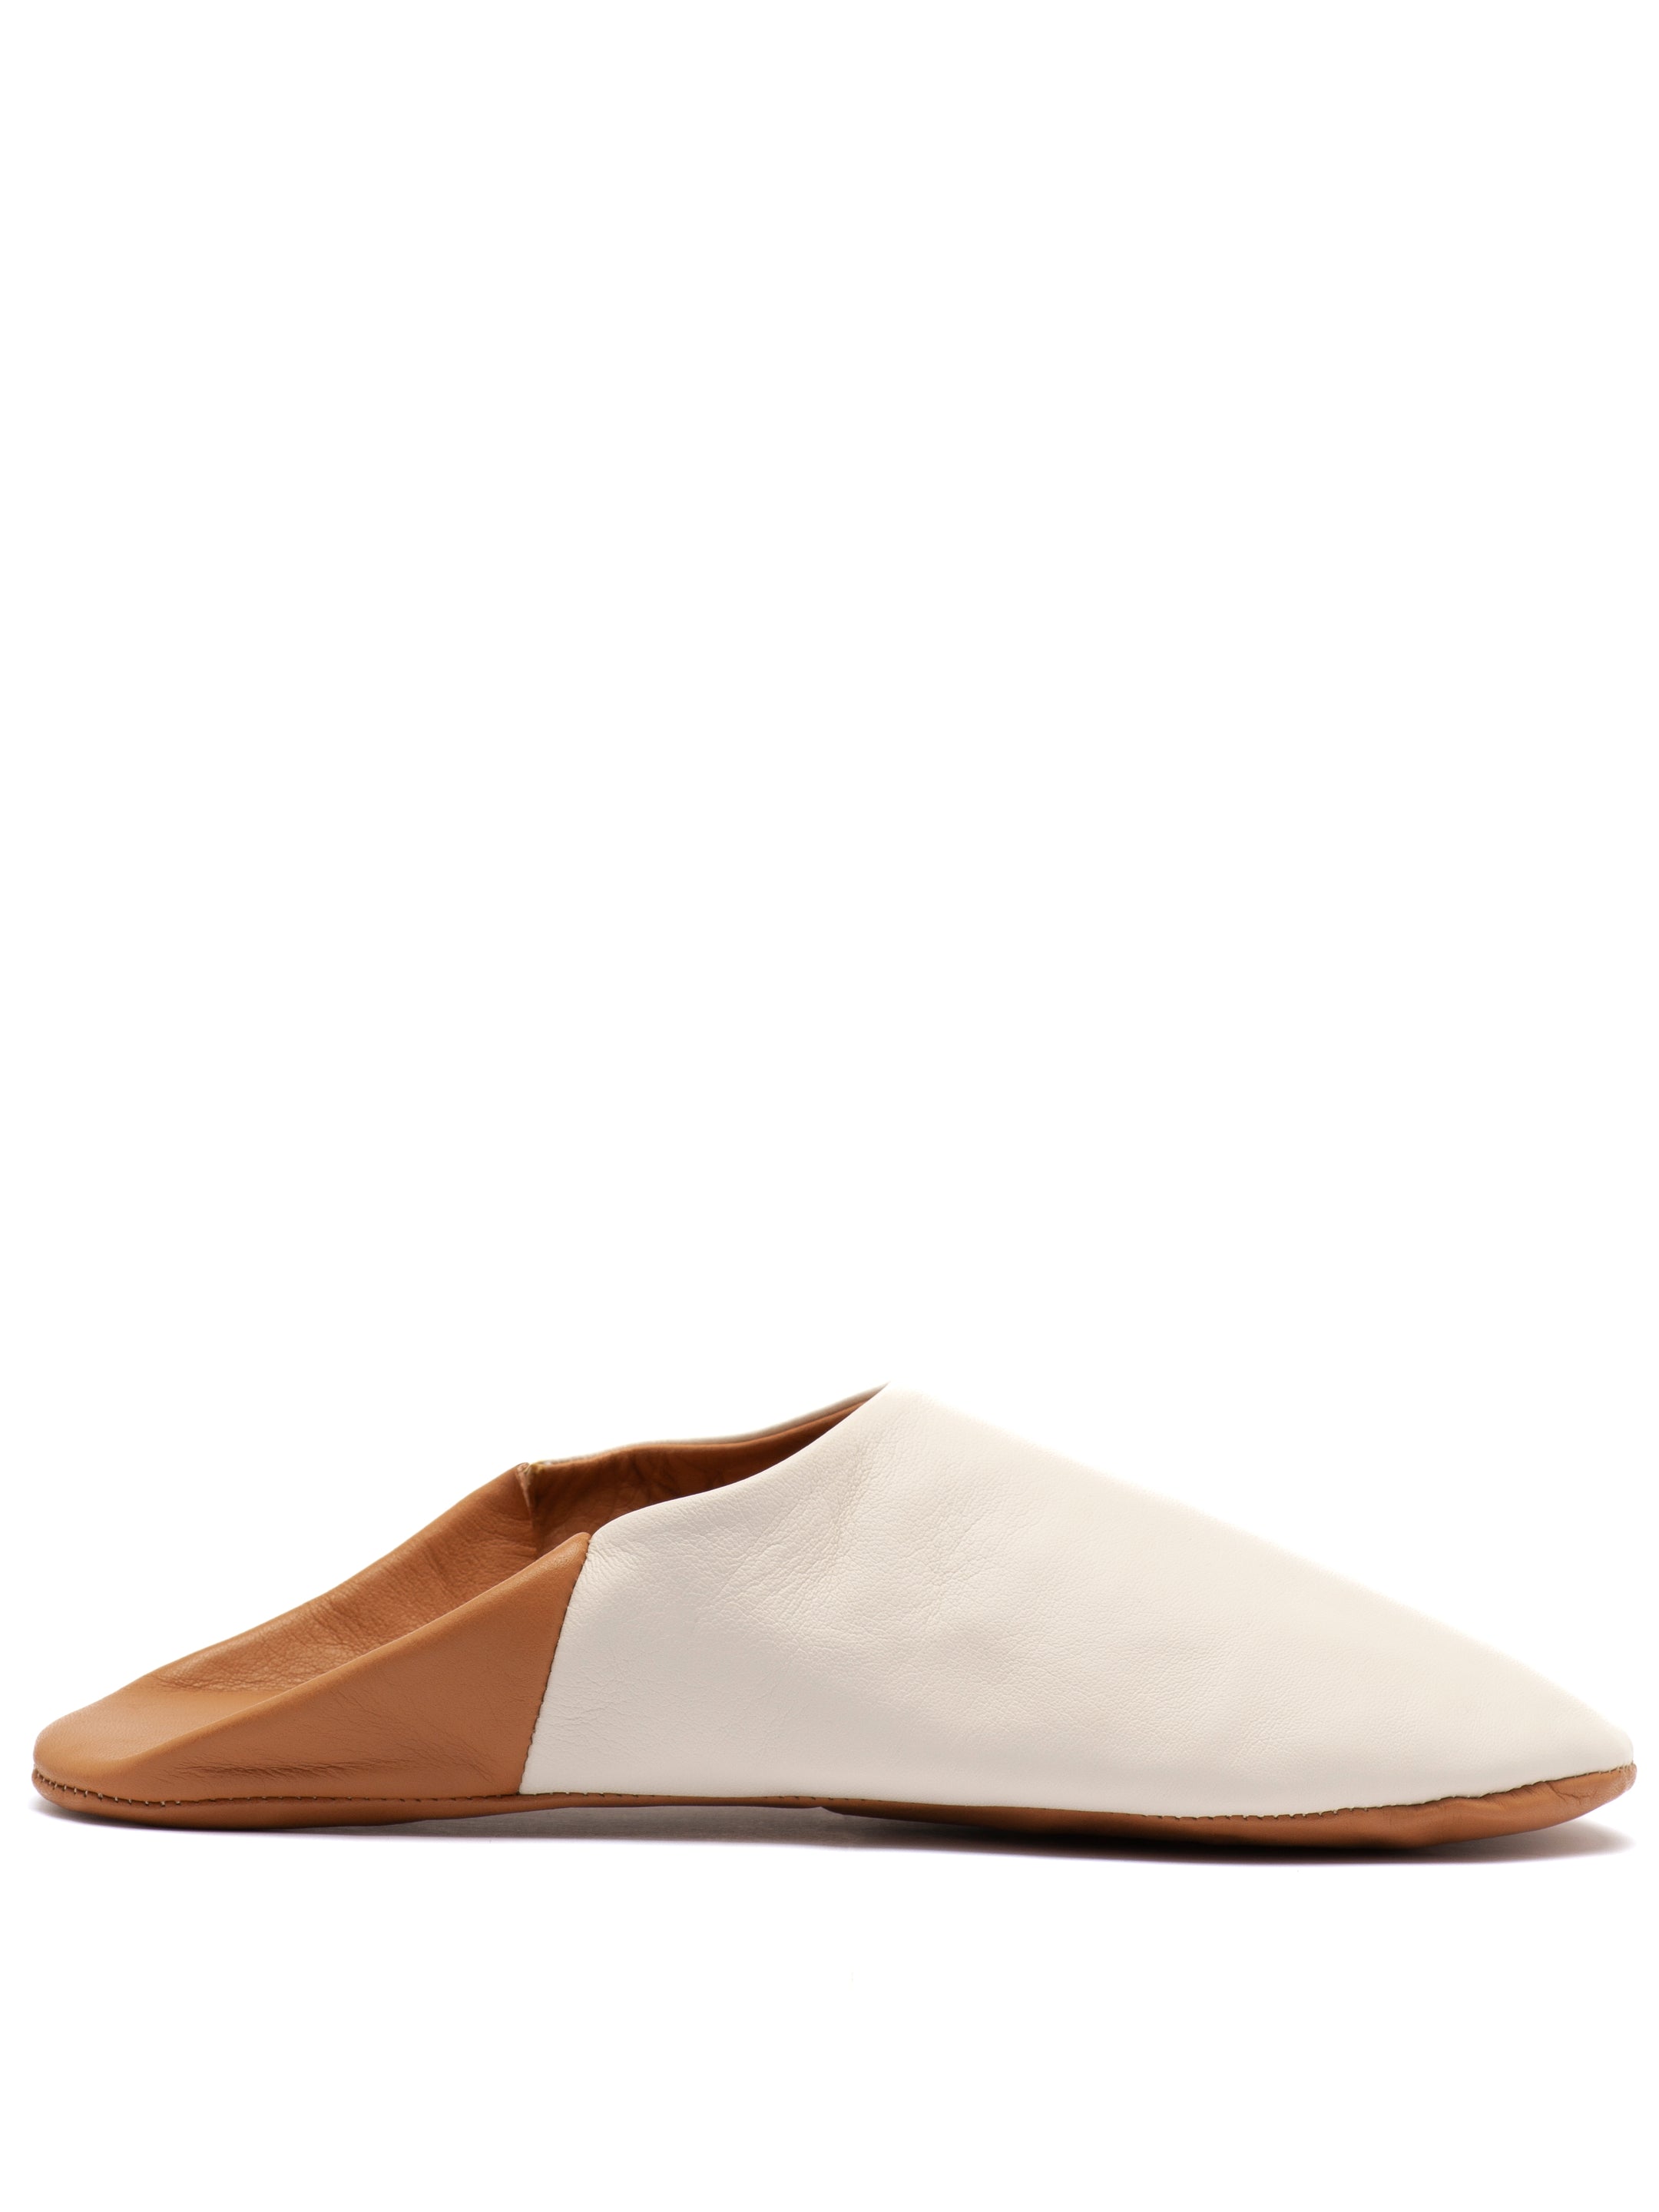 Creamy Cappuccino - Leather Slippers